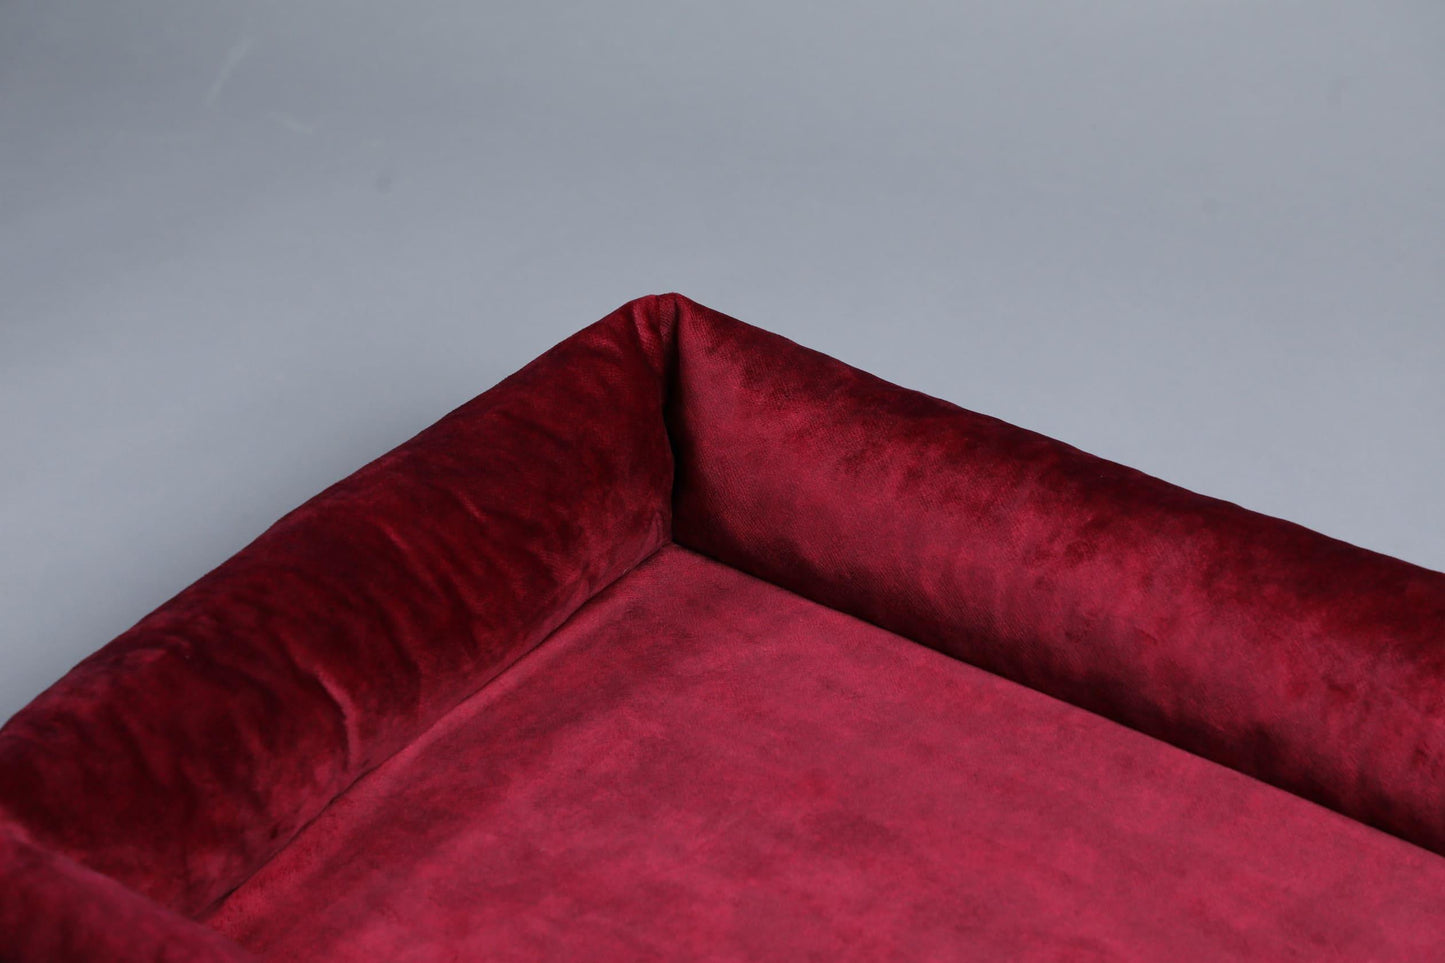 2-sided classic dog bed. RUBY RED - European handmade dog accessories by My Wild Other